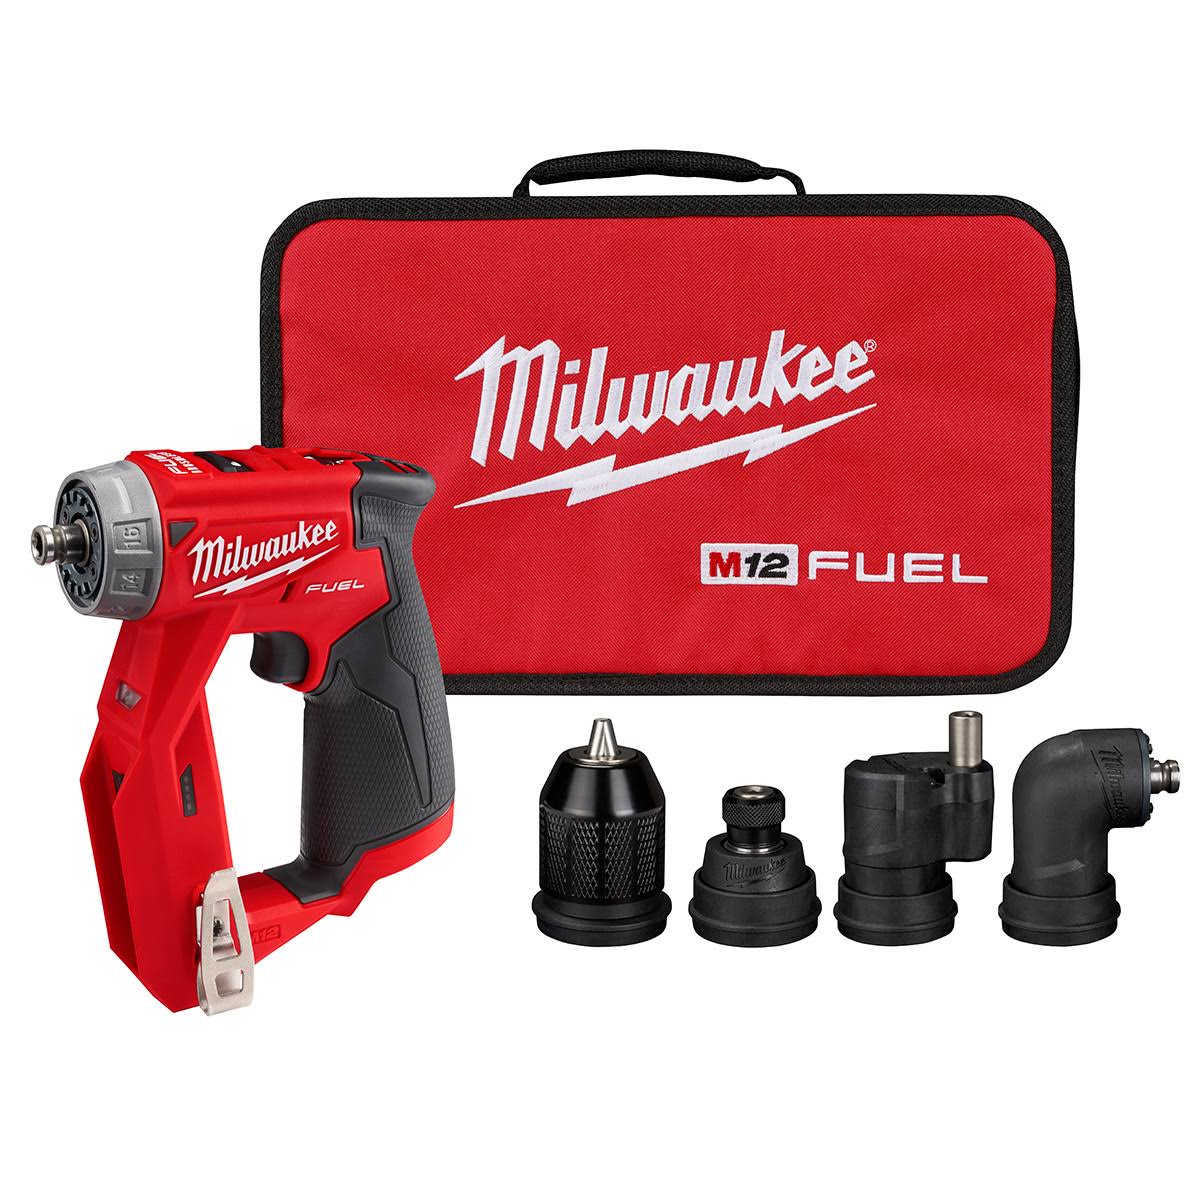 Milwaukee 2505-20 M12 FUEL Installation Drill Driver - Tool Only